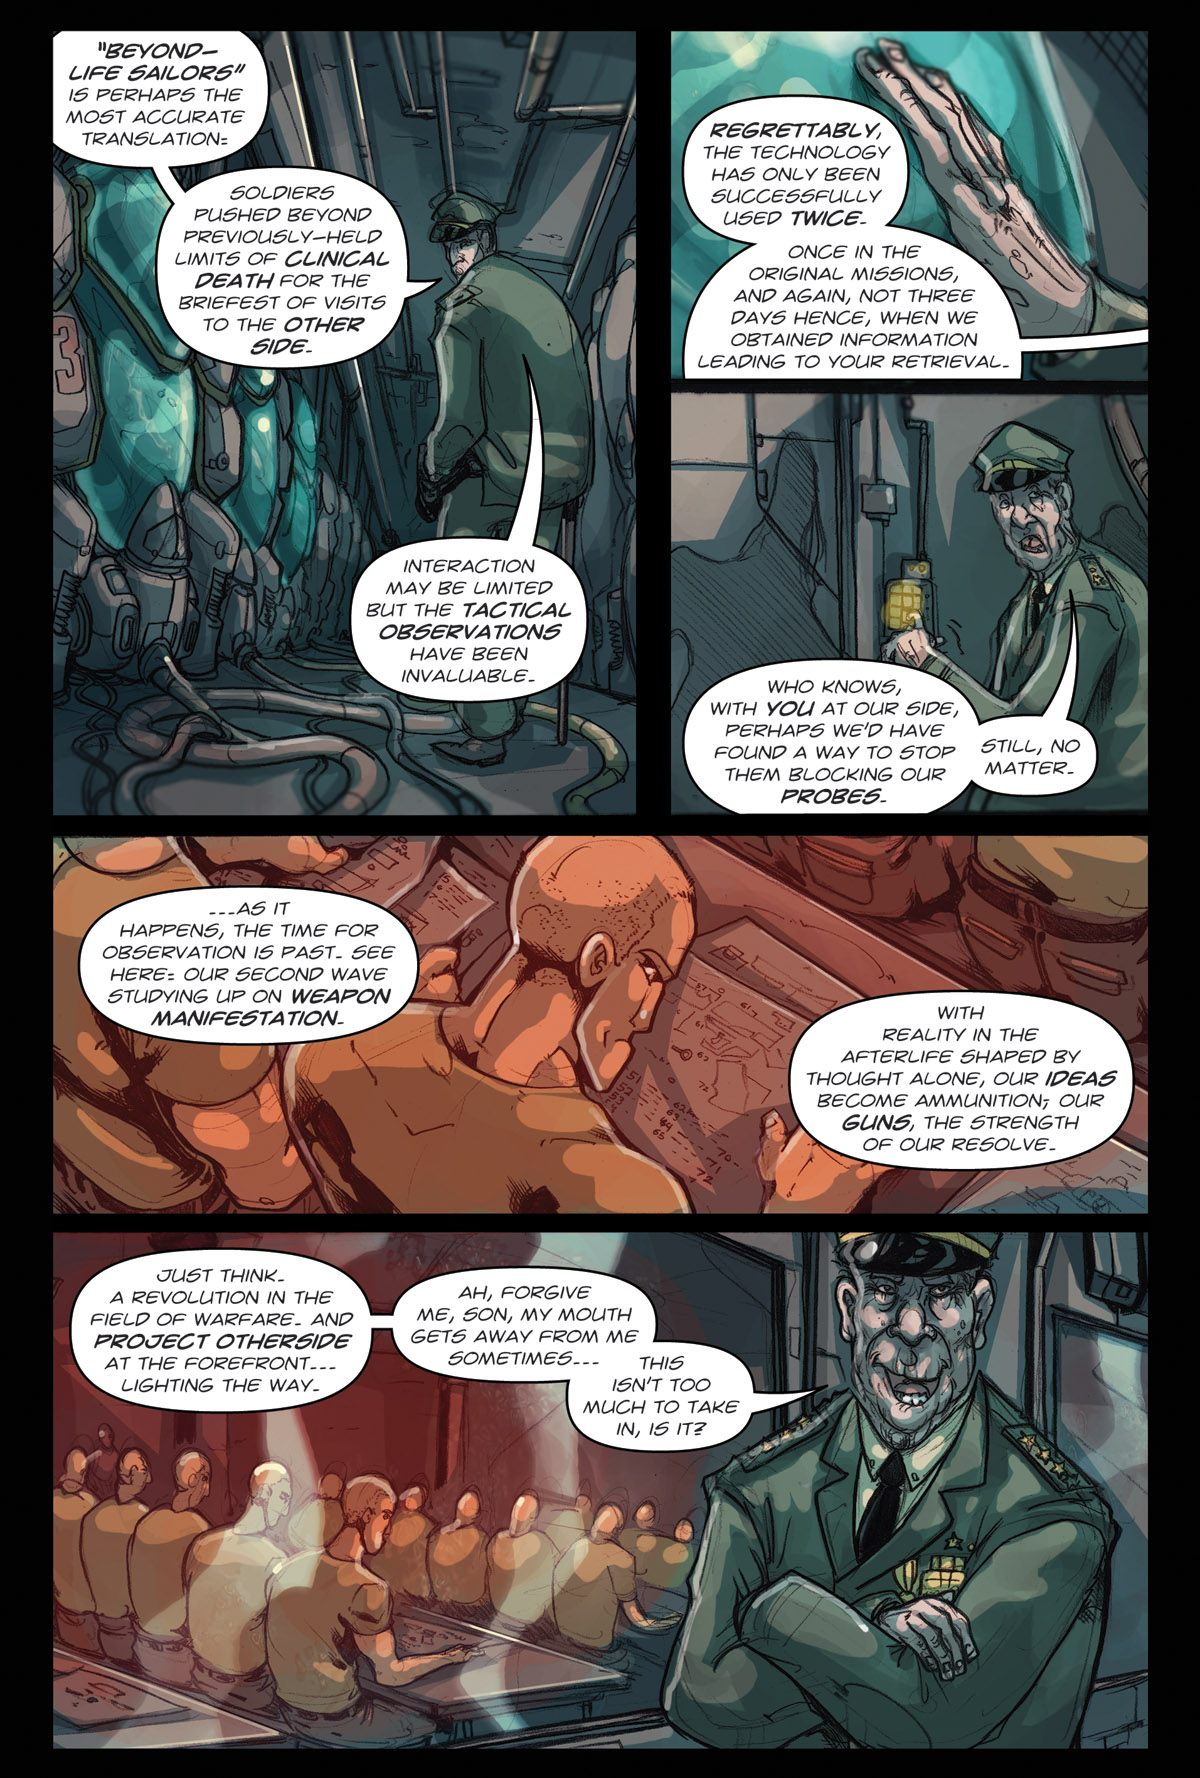 Afterlife Inc. | Near Life | Page 10